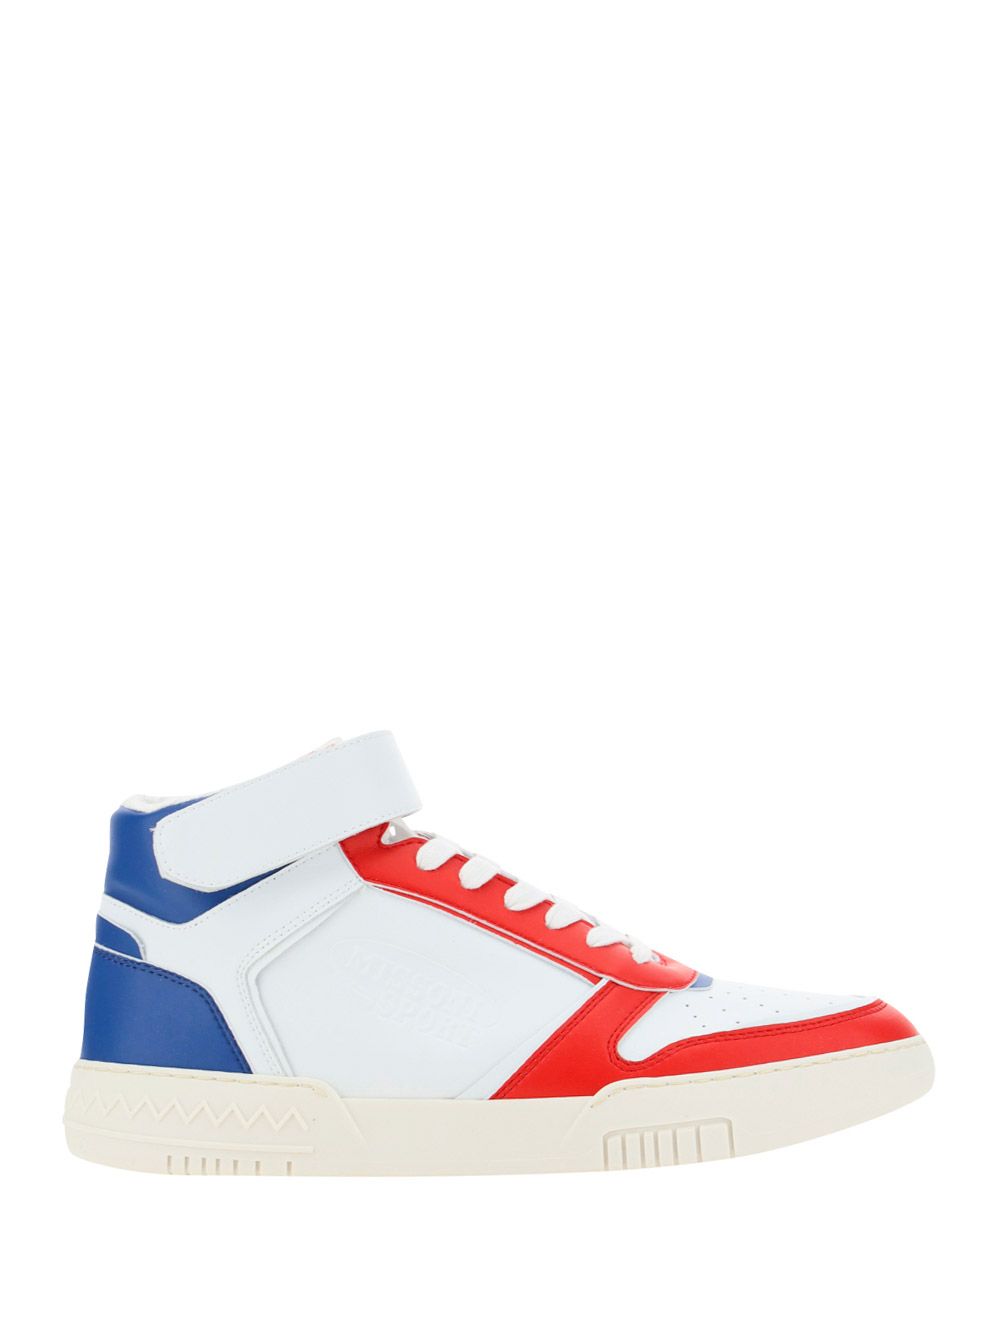 Acbc X Missoni Sneakers In White/red/blue